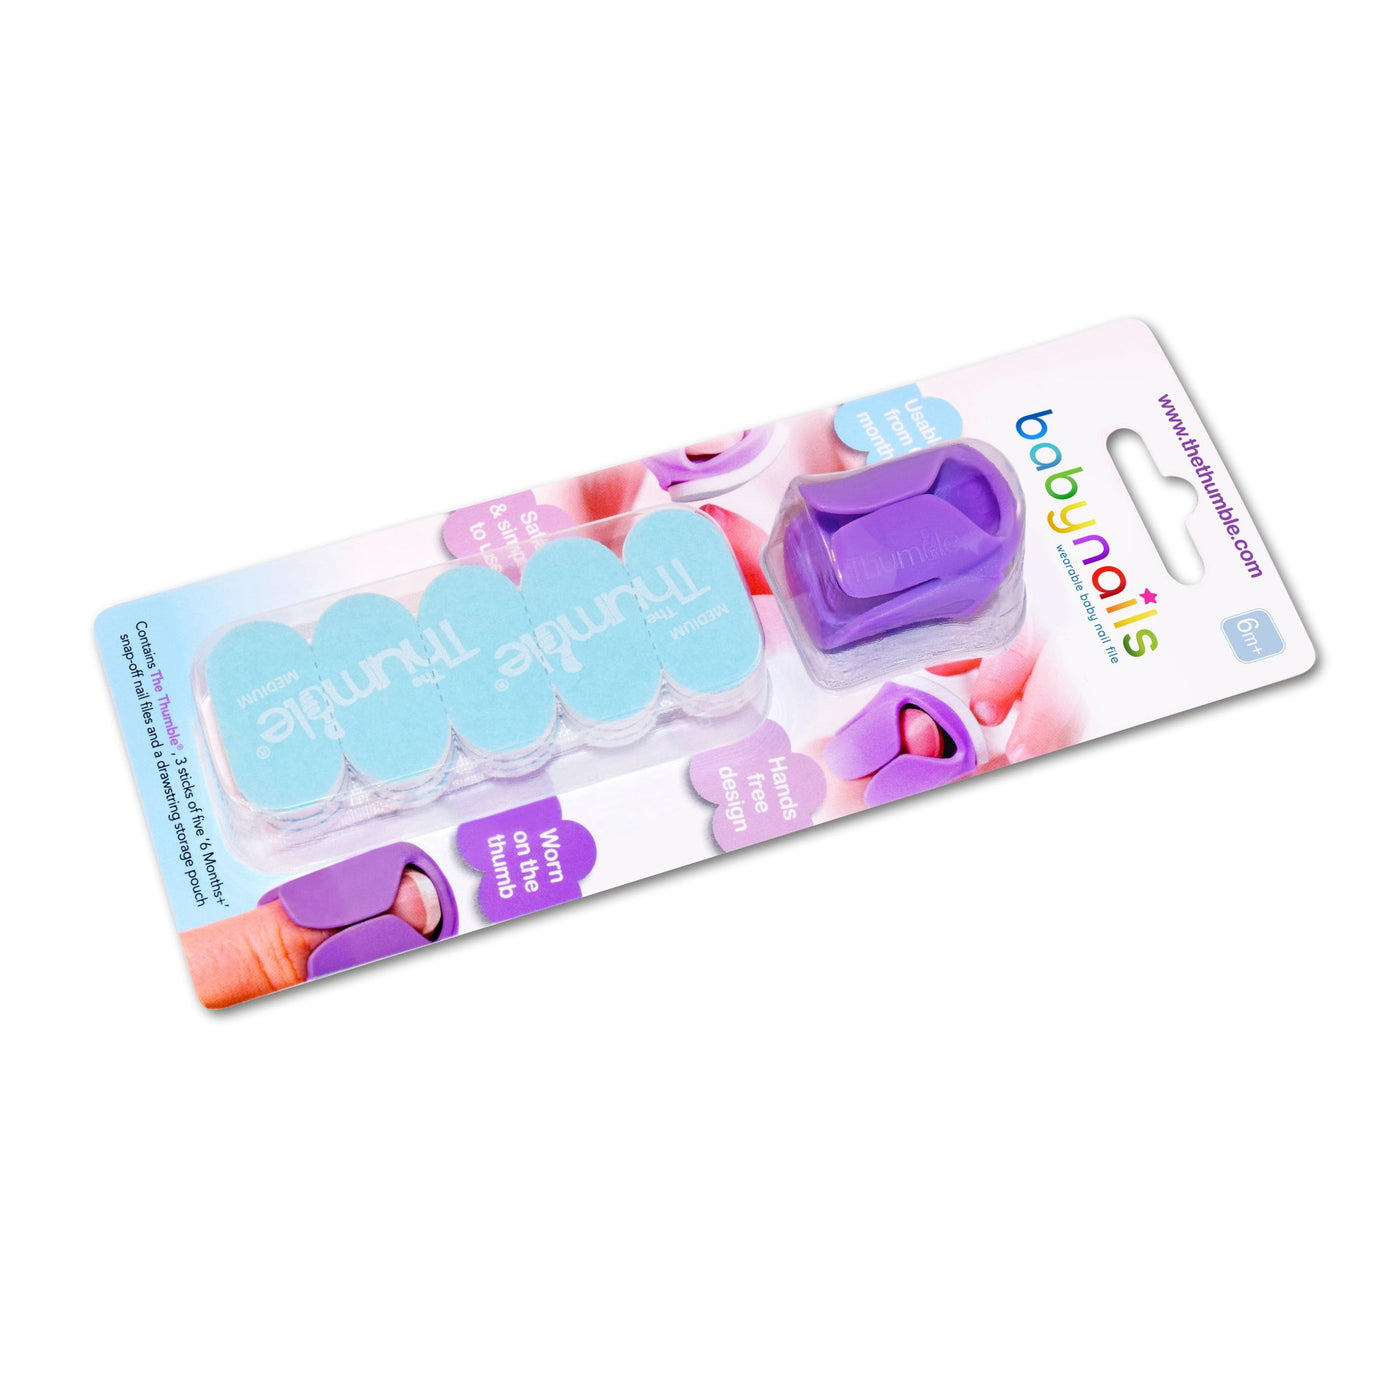 Baby Nails wearable baby nail file (6 Months+ pack) by Thumble Baby Care